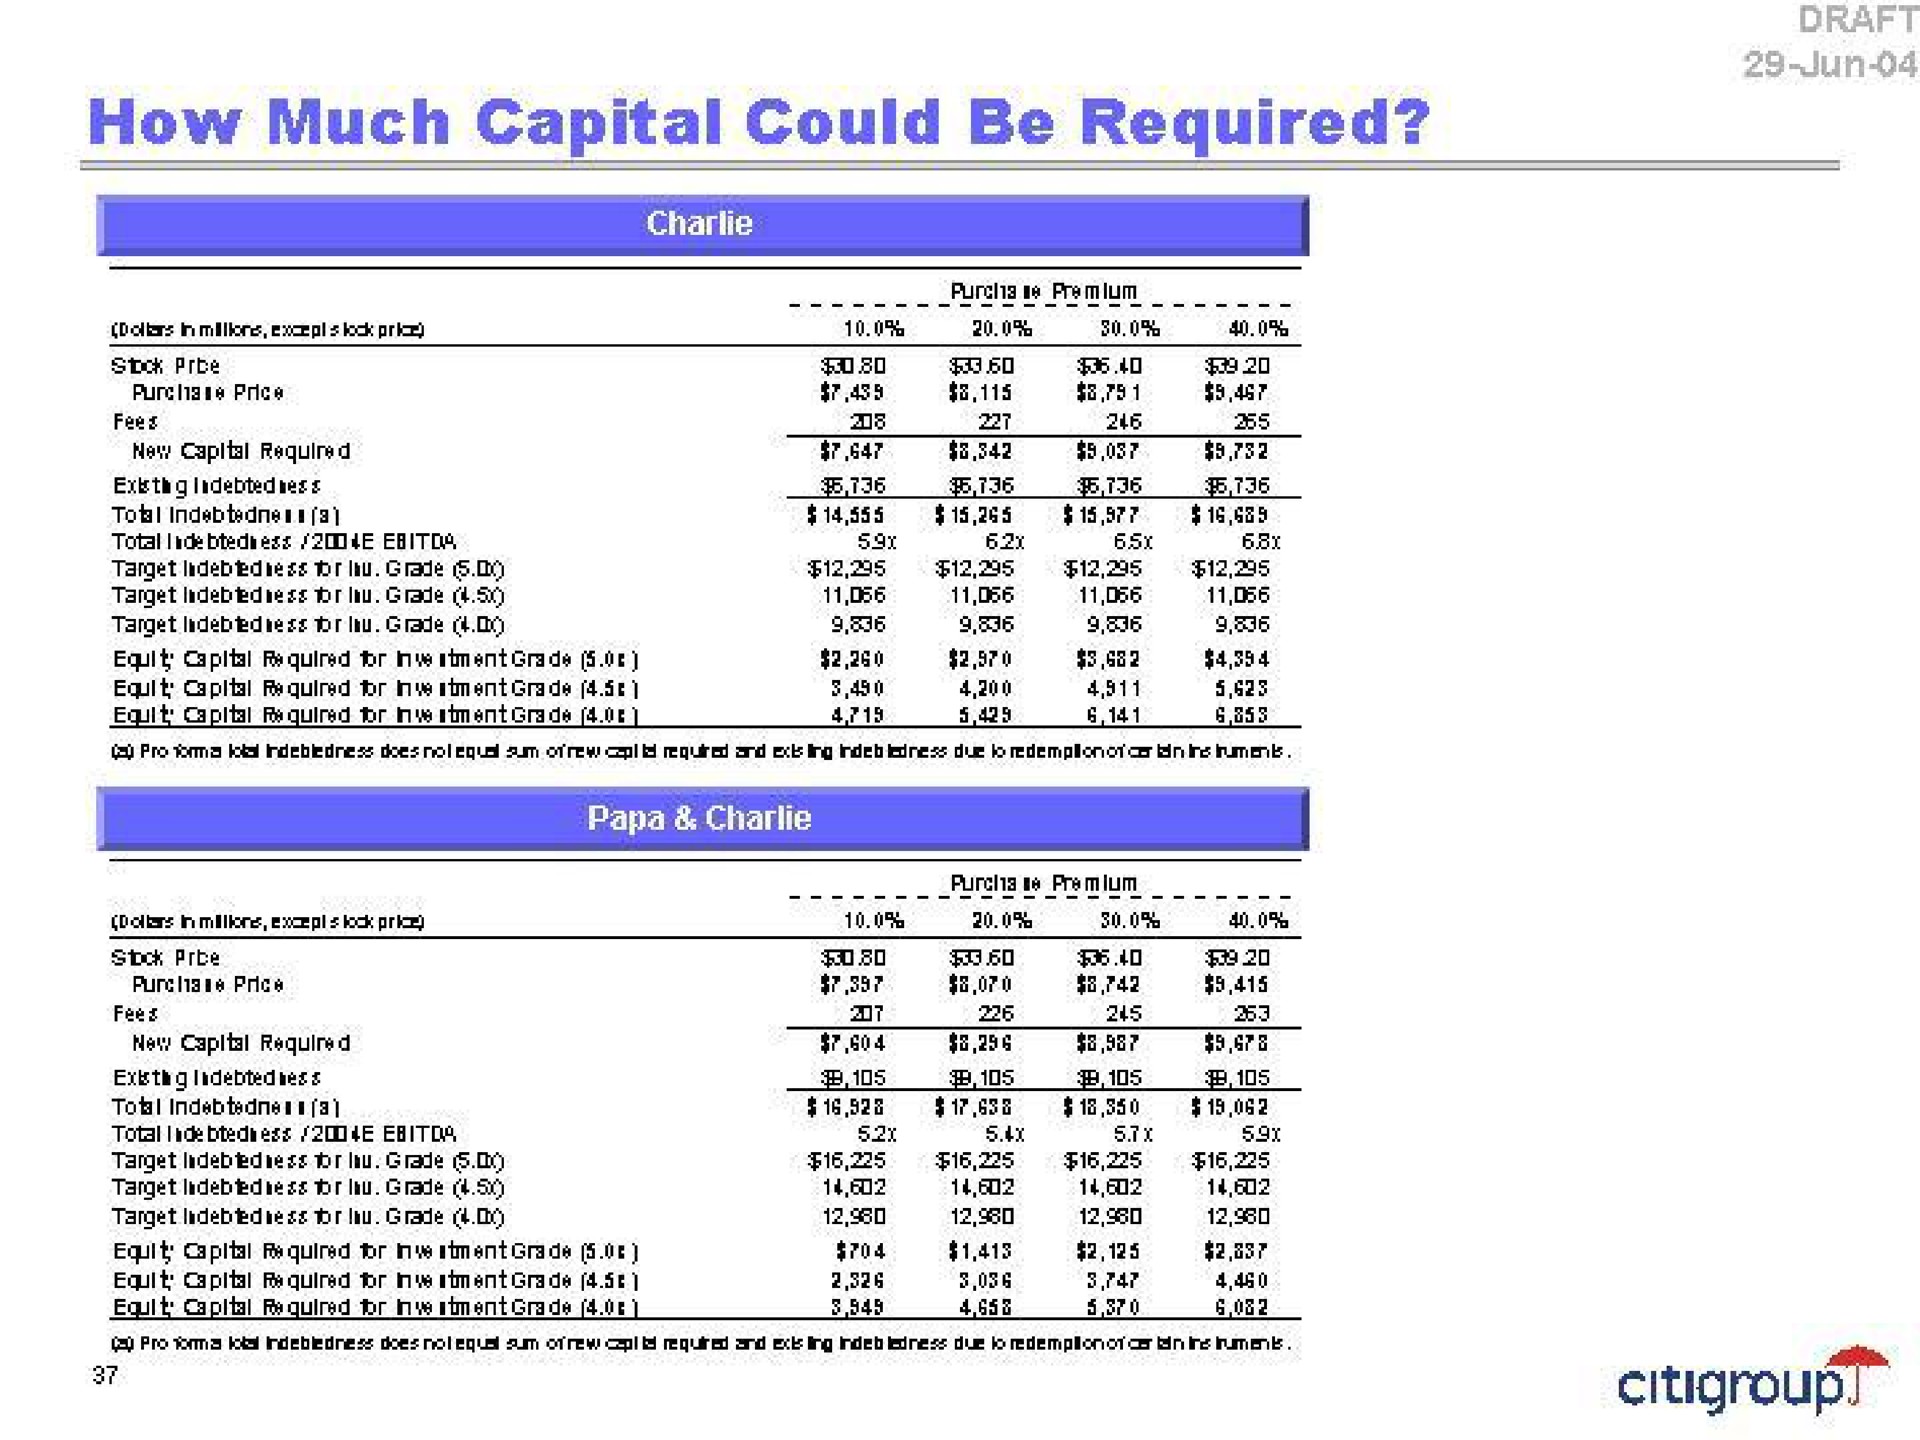 how much capital could be required tie | Citi